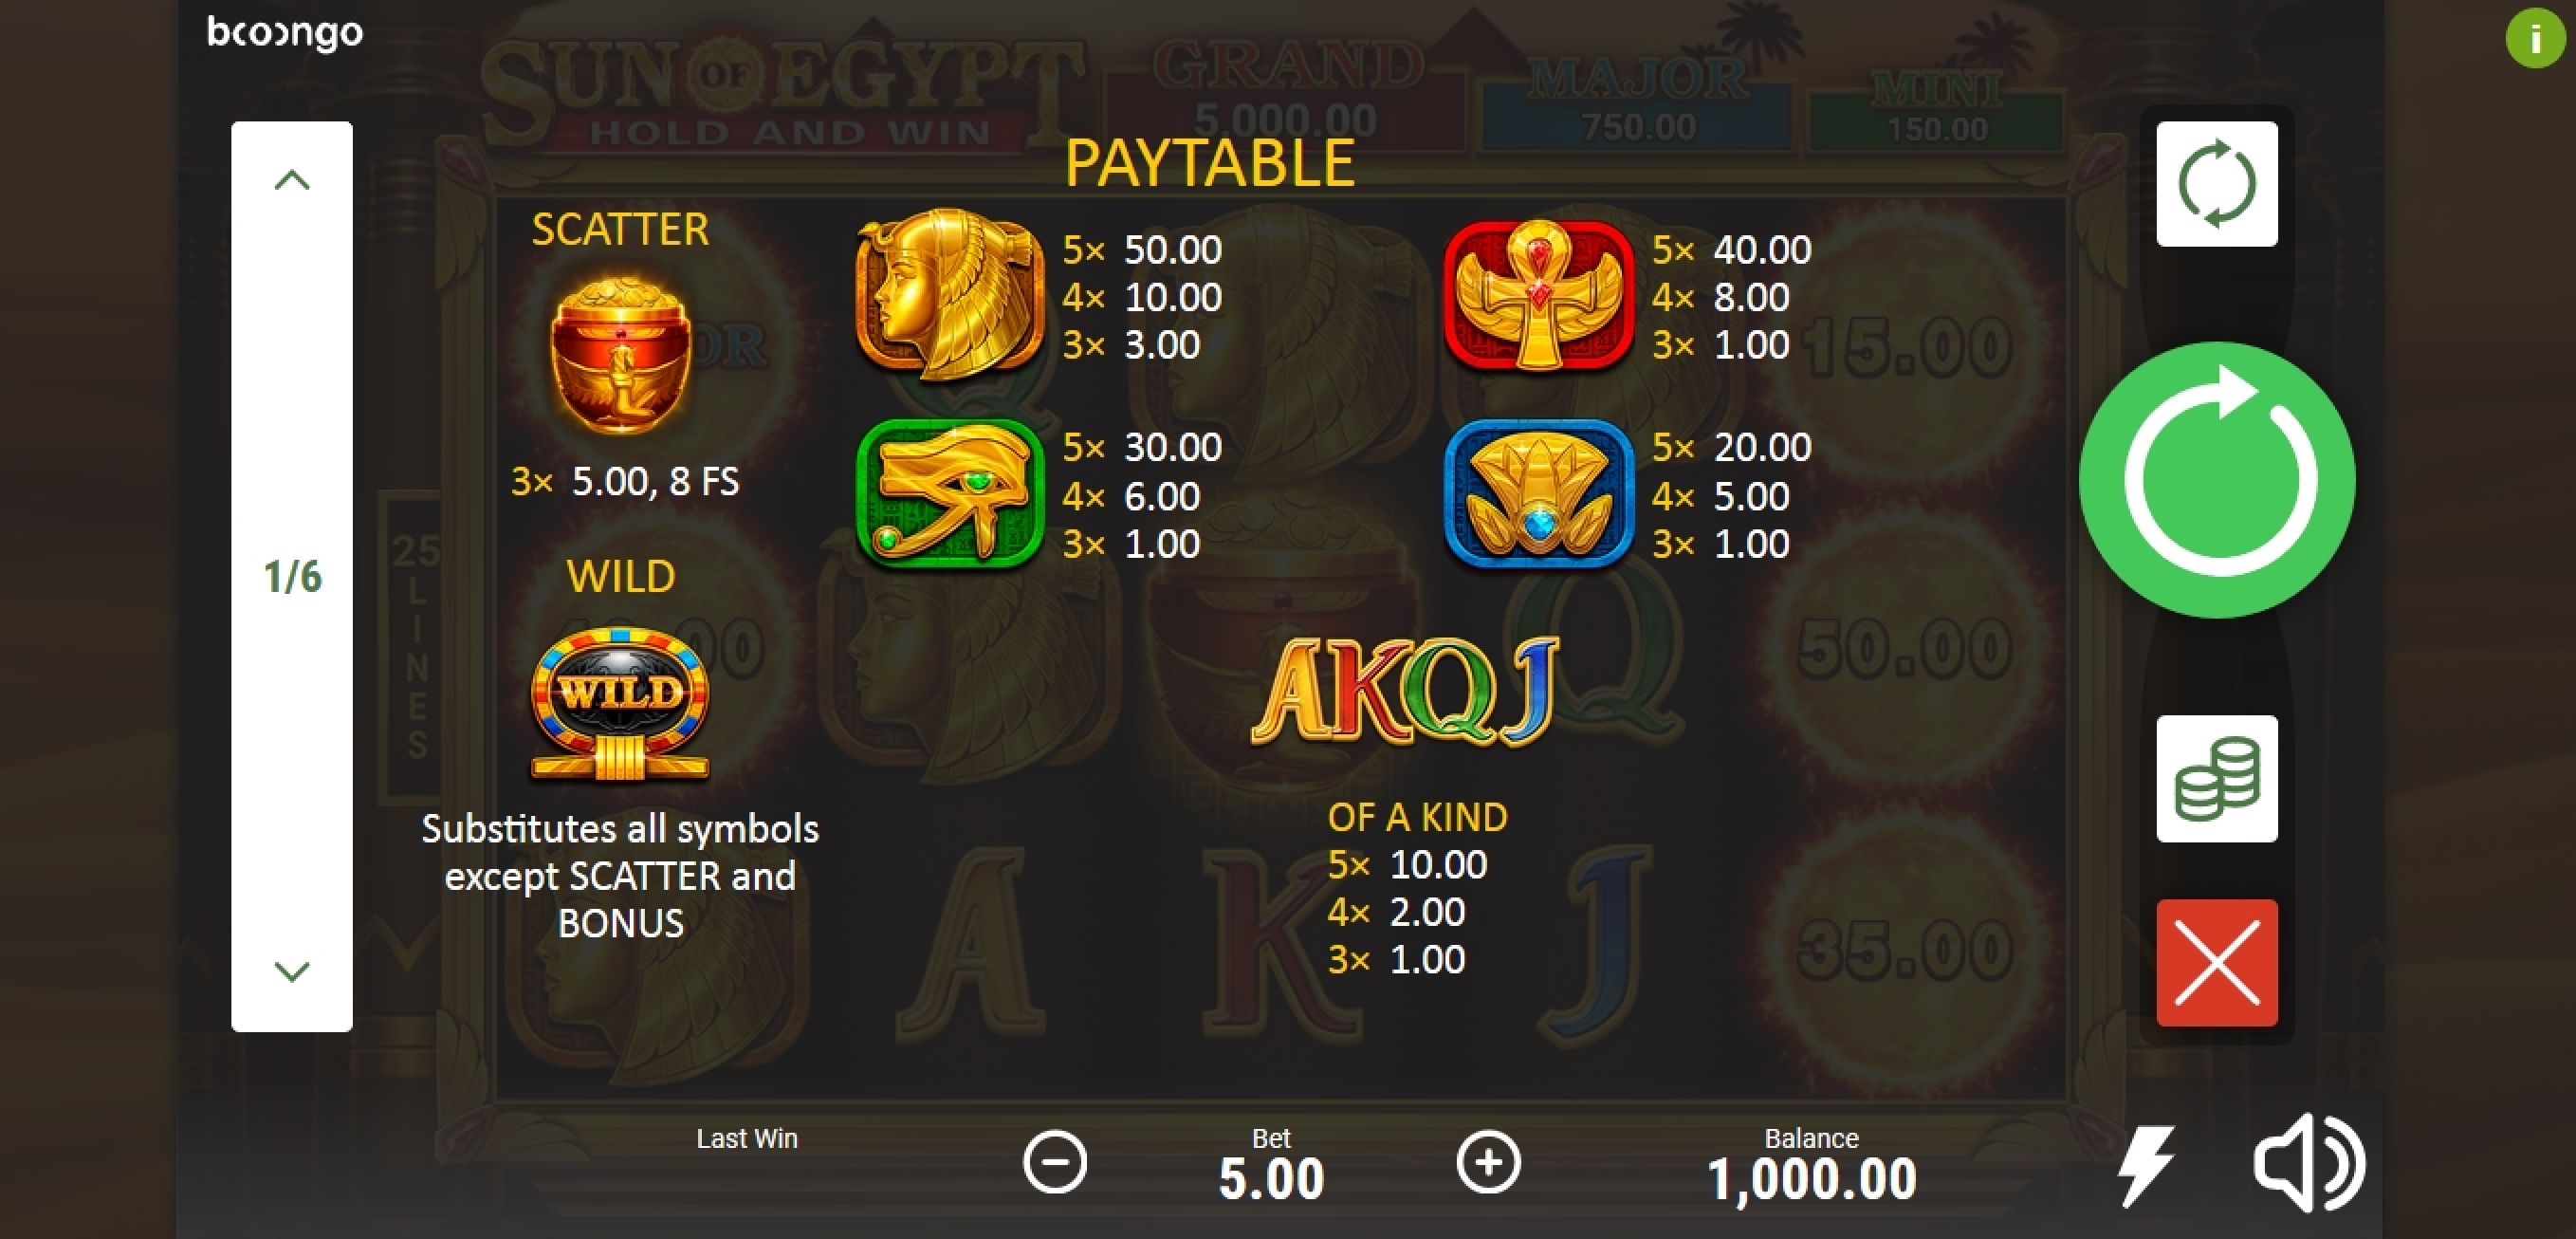 Info of Sun of Egypt Slot Game by Booongo Gaming